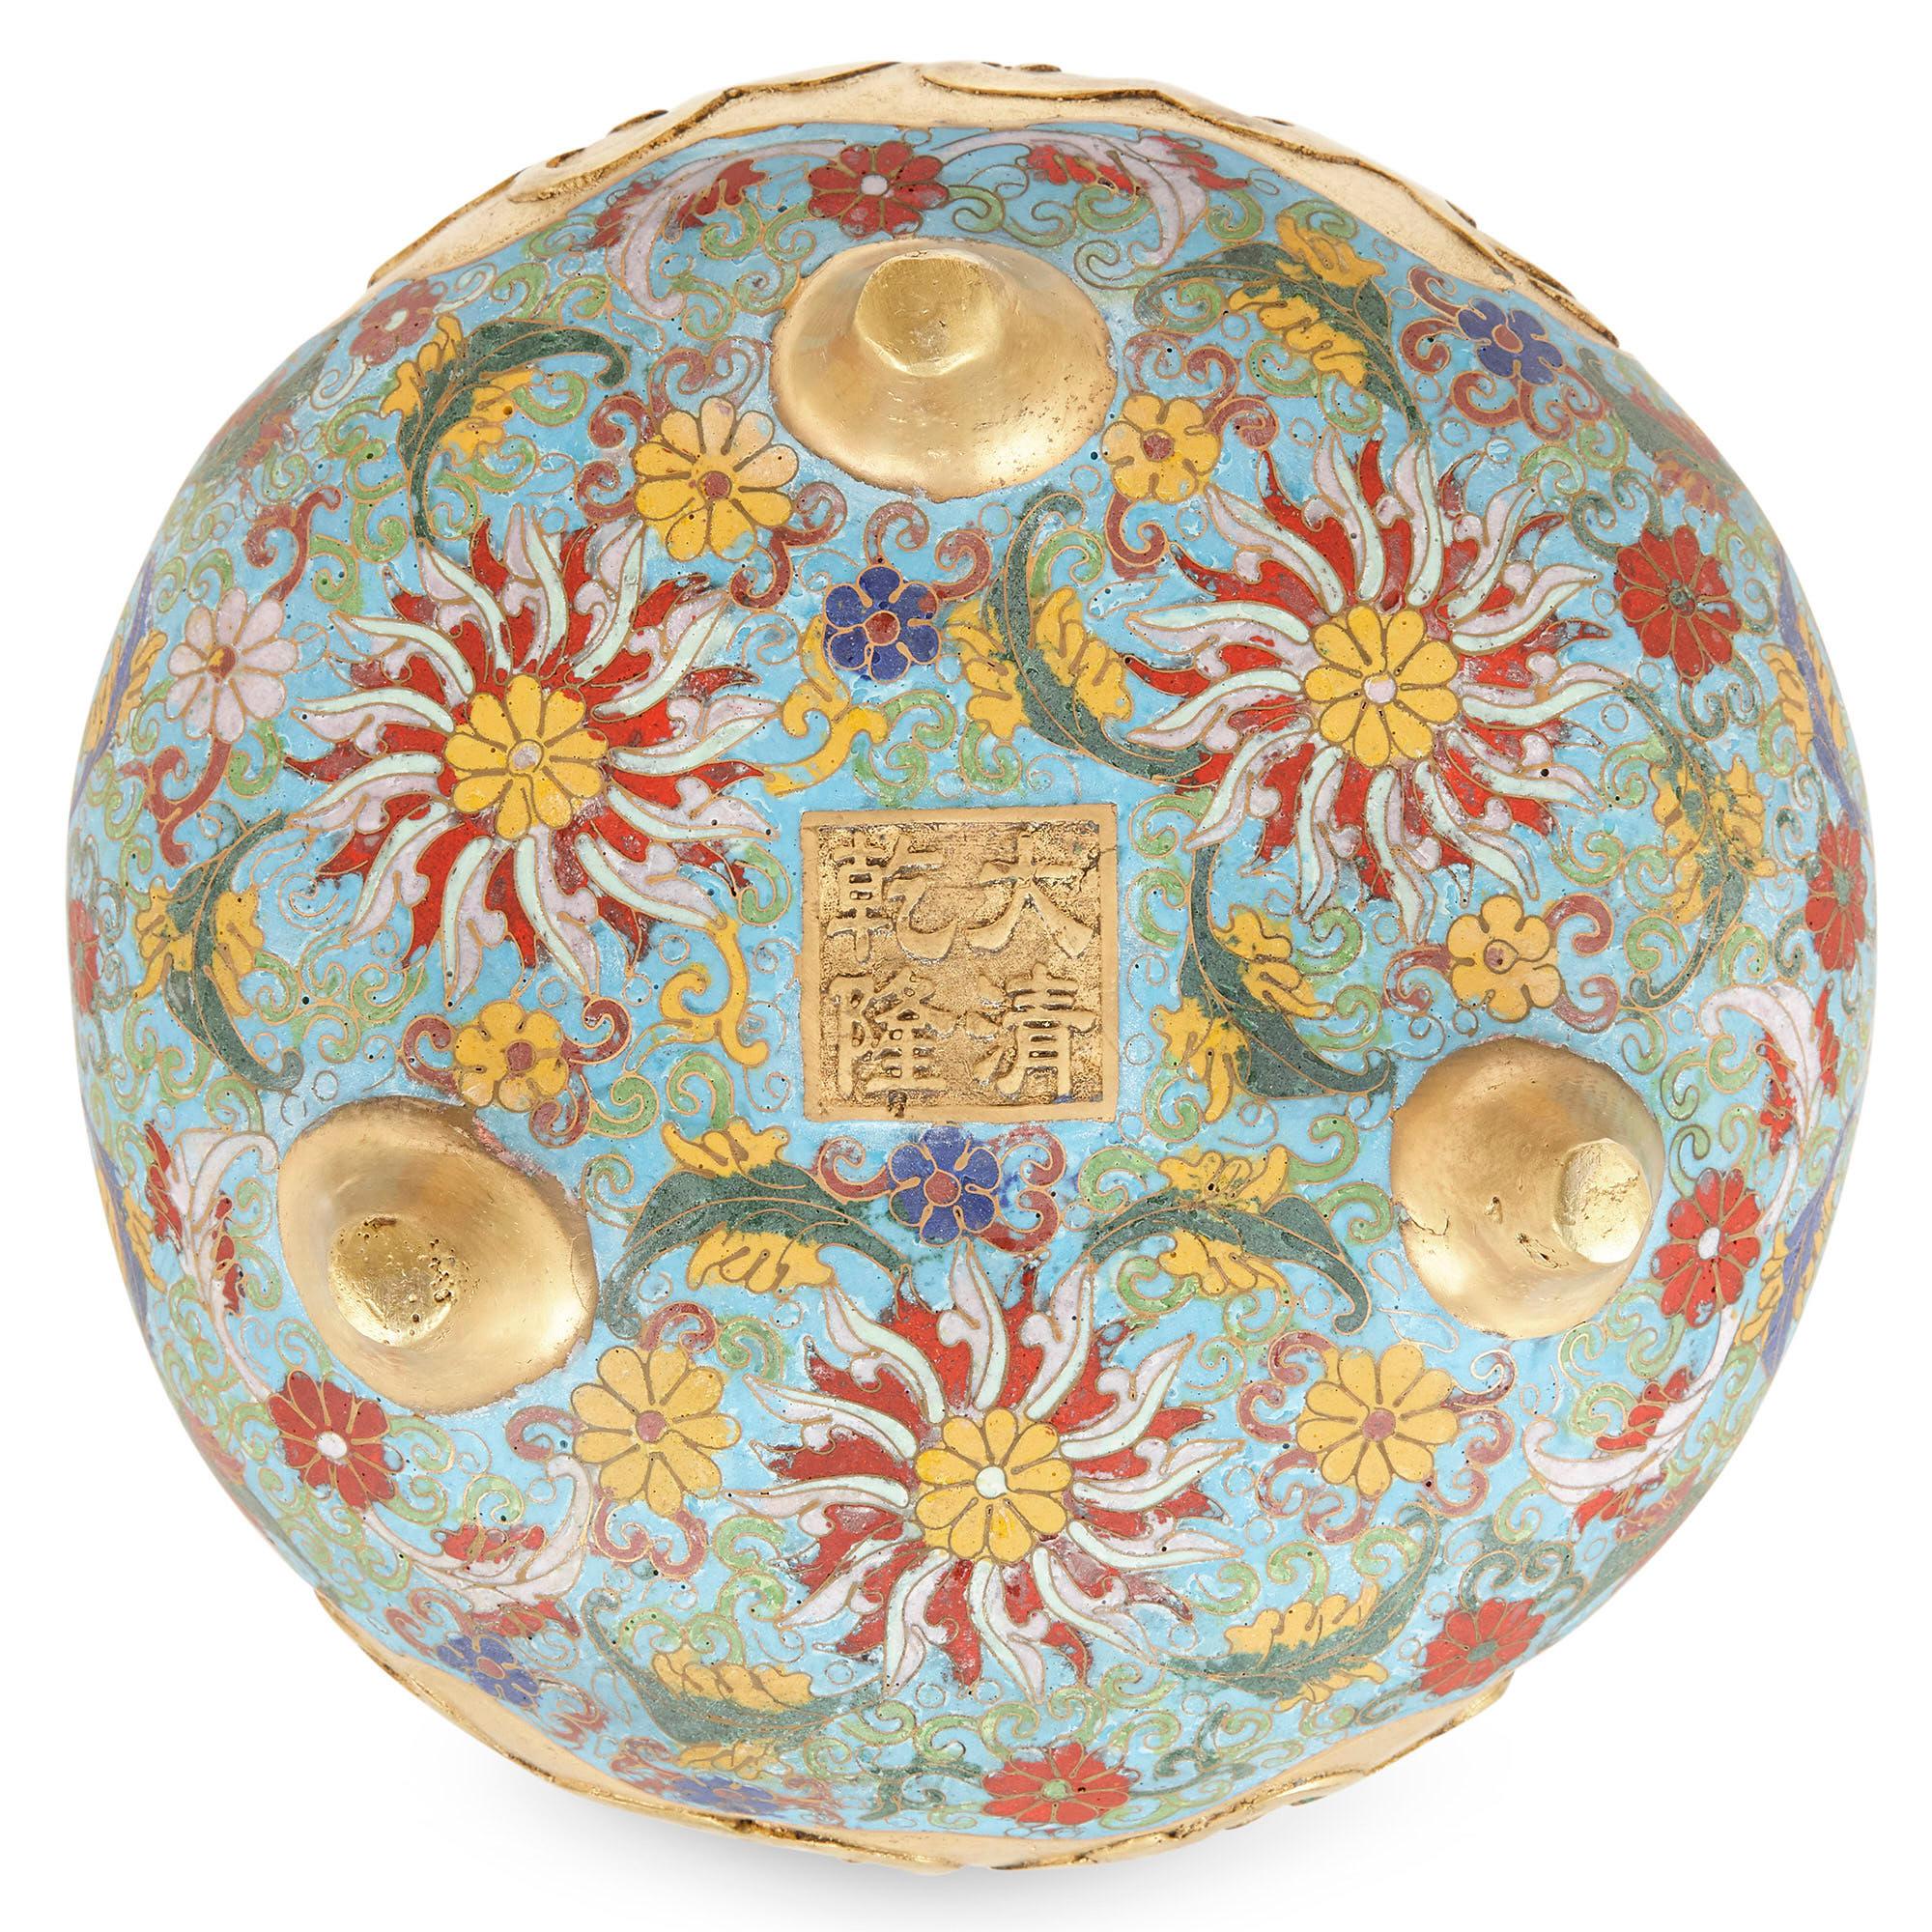 20th Century Chinese Floral Cloisonné Enamel and Ormolu Vase for Islamic Market For Sale